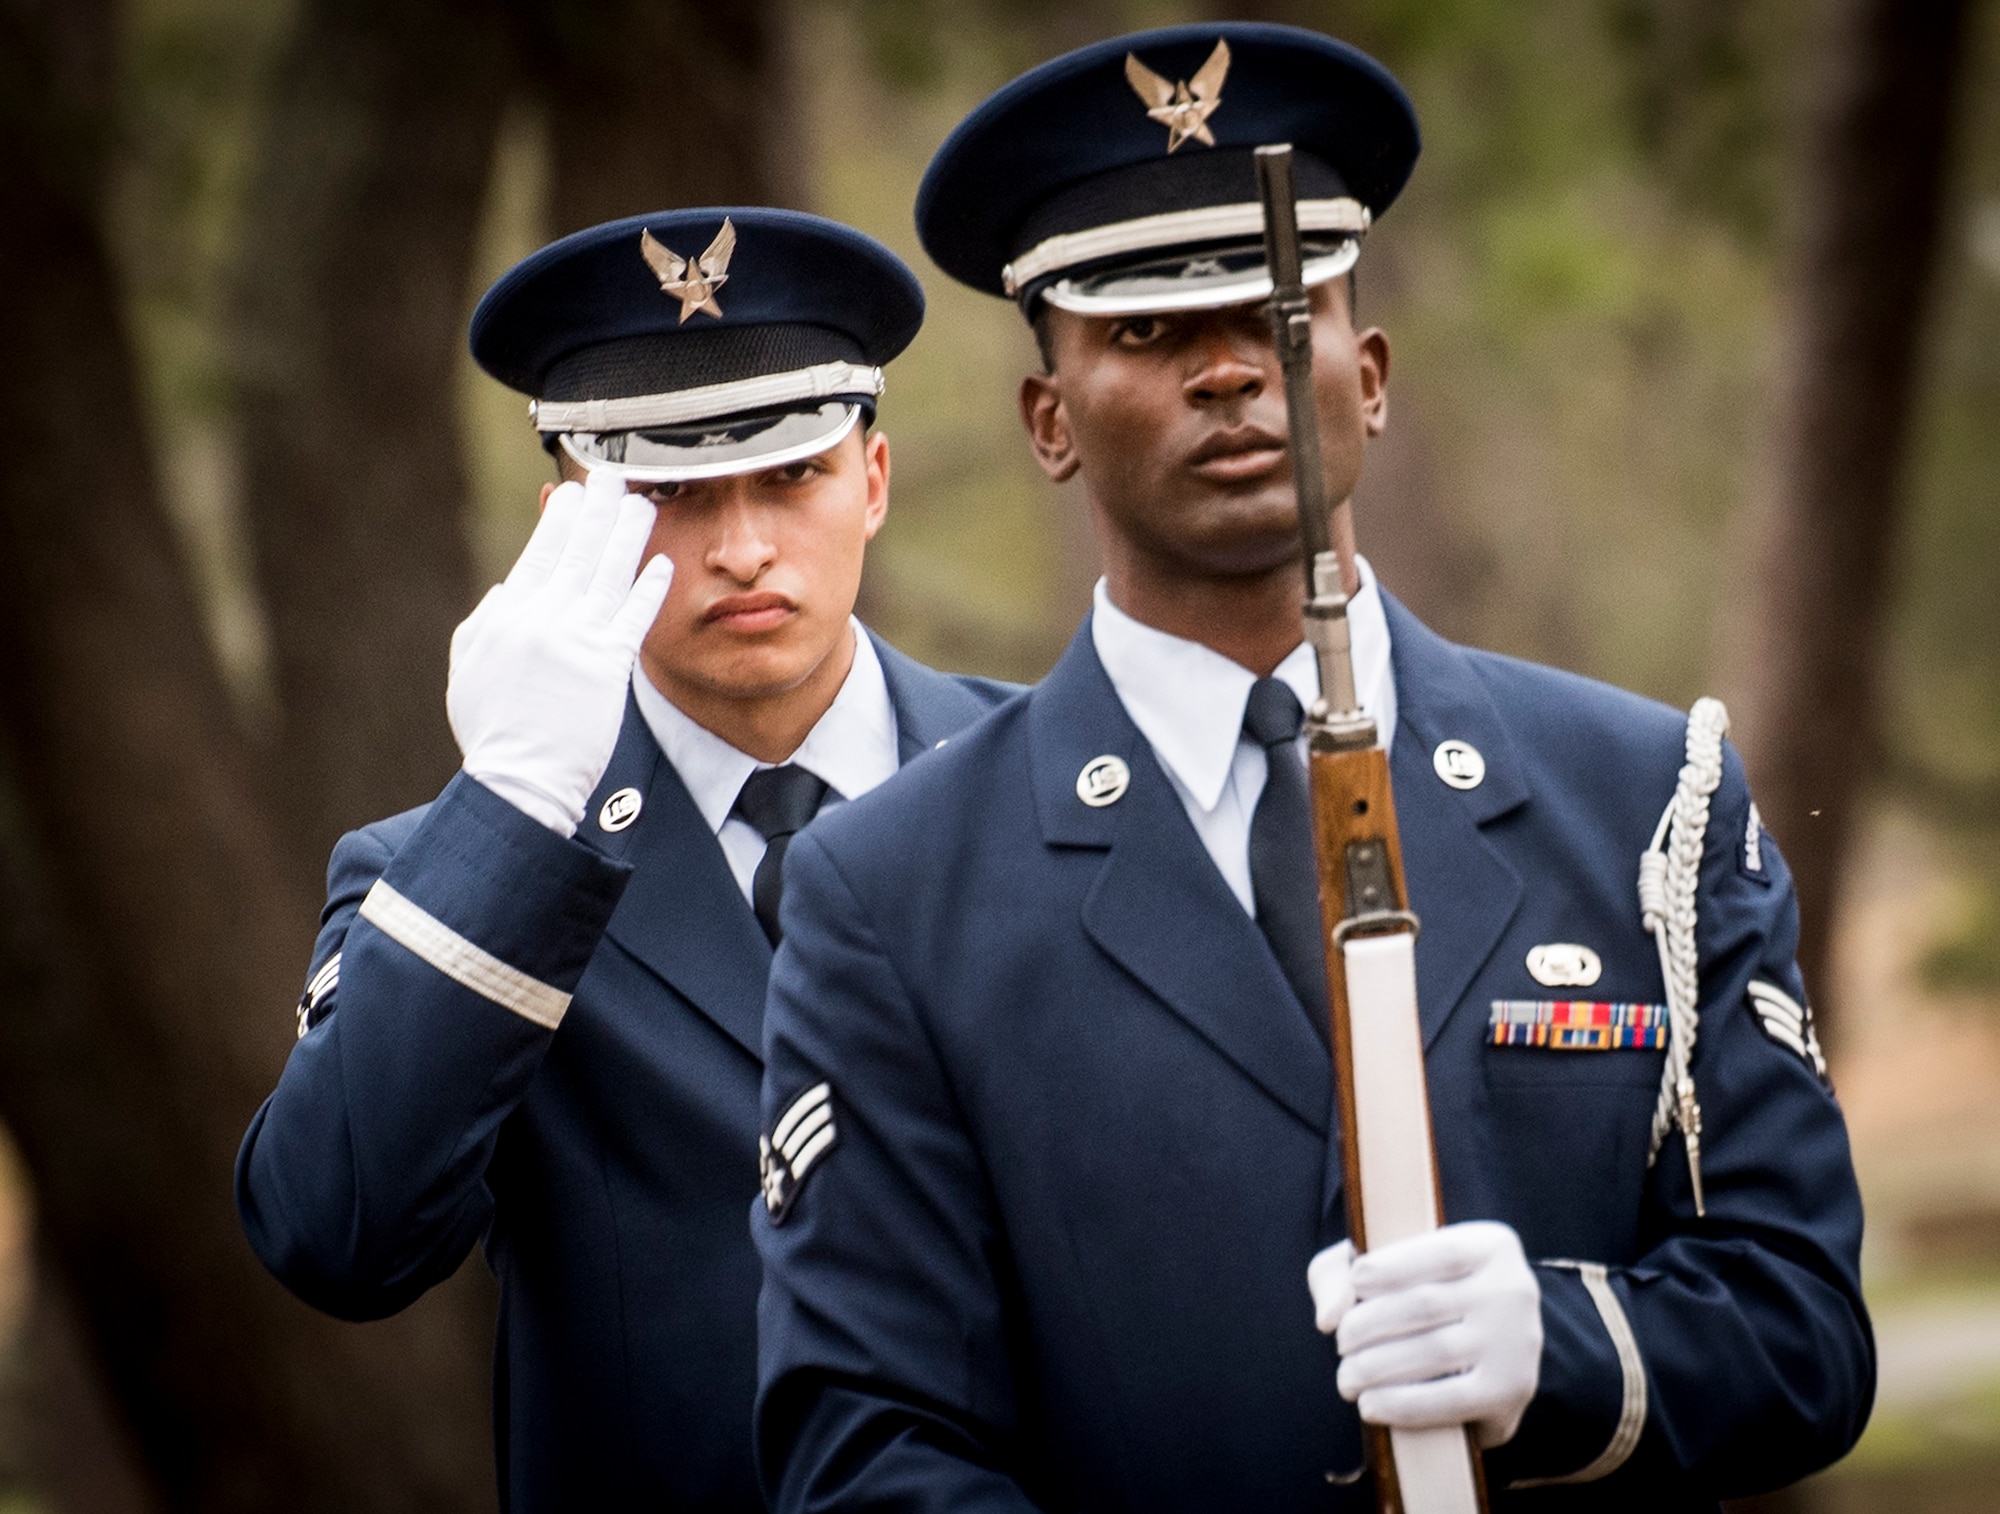 Senior Airmen Blake Banning and Kadeem Bell stand at “present arms” after their rifle volley procedures during the unit’s graduation ceremony at Eglin Air Force Base, Fla., March 1.  Approximately 12 new Airmen graduated from the 120-plus-hour course. The graduation performance includes flag detail, rifle volley, pall bearers and bugler for friends, family and unit commanders. (U.S. Air Force photo/Samuel King Jr.)